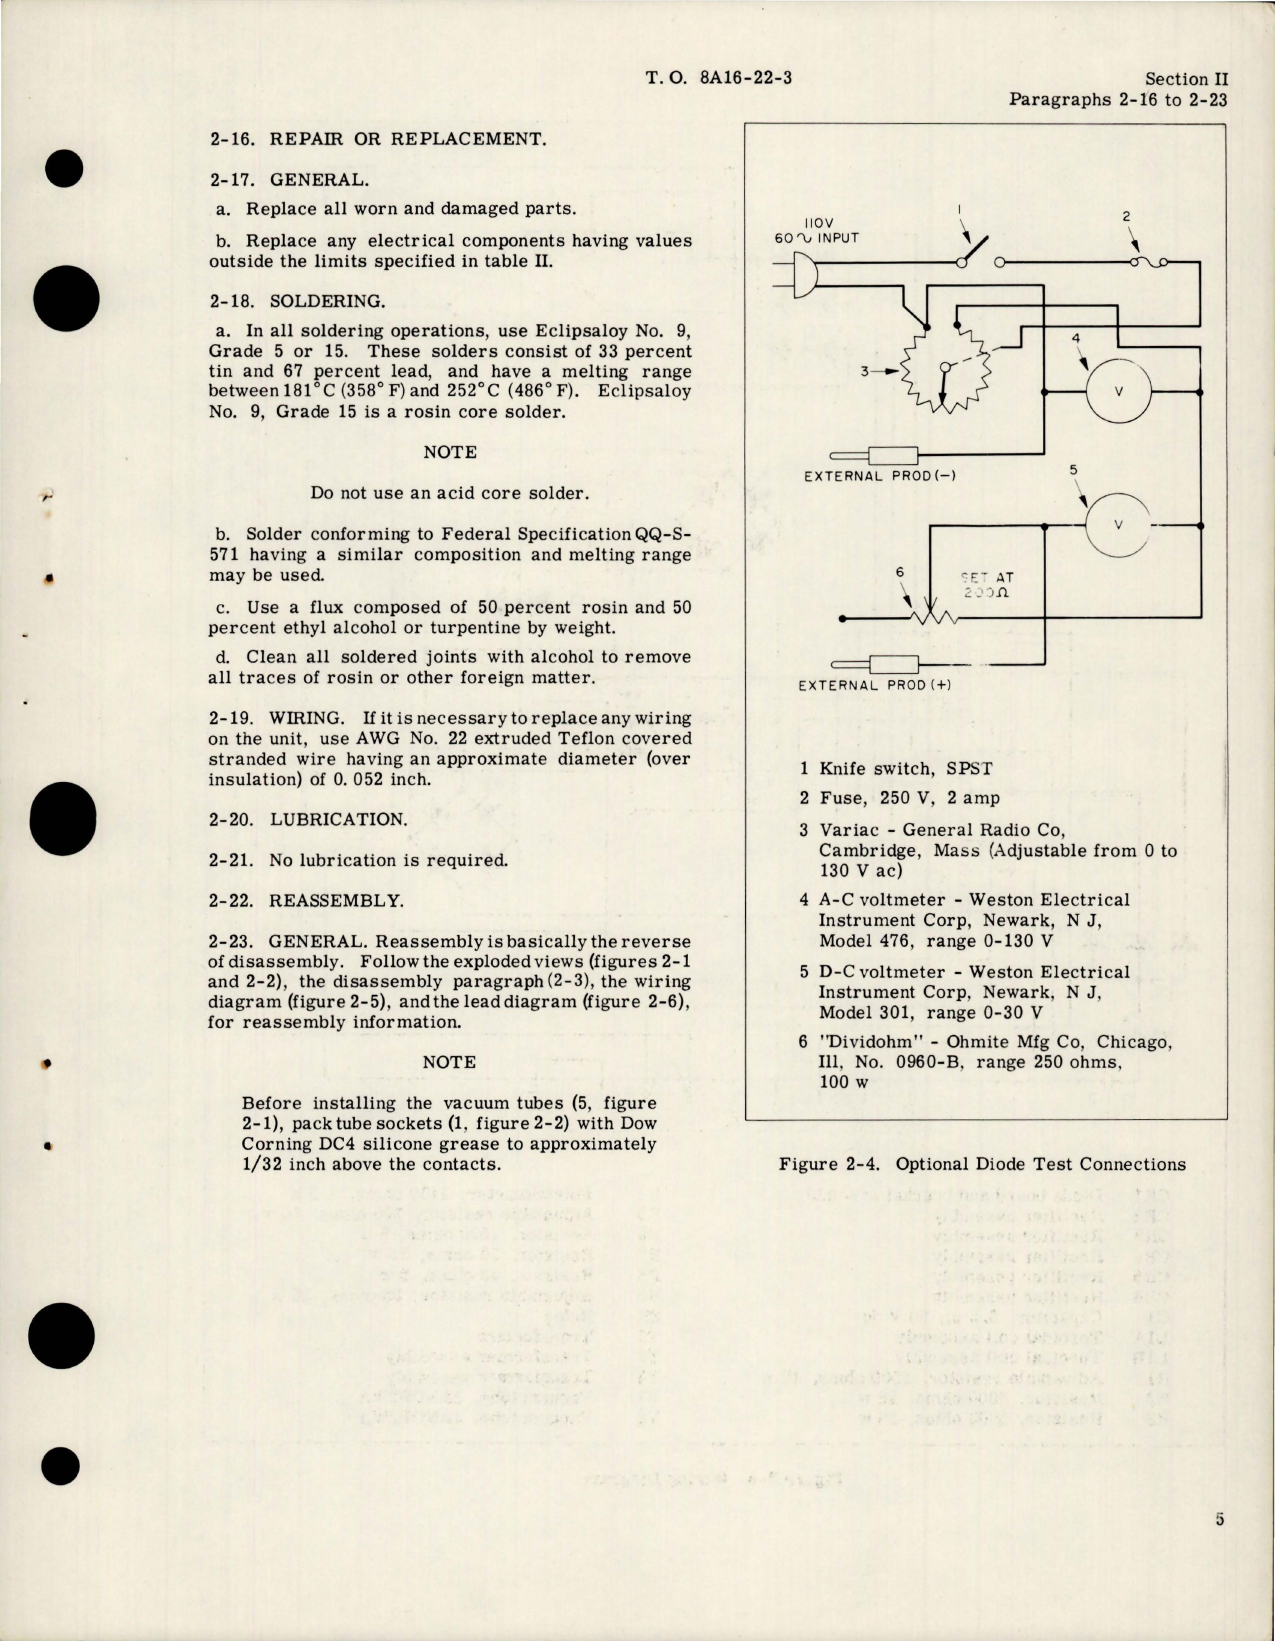 Sample page 9 from AirCorps Library document: Overhaul Instructions for Voltage Regulators - Types 20B15-1-A, 20B15-1-B, and 20B15-1-C 